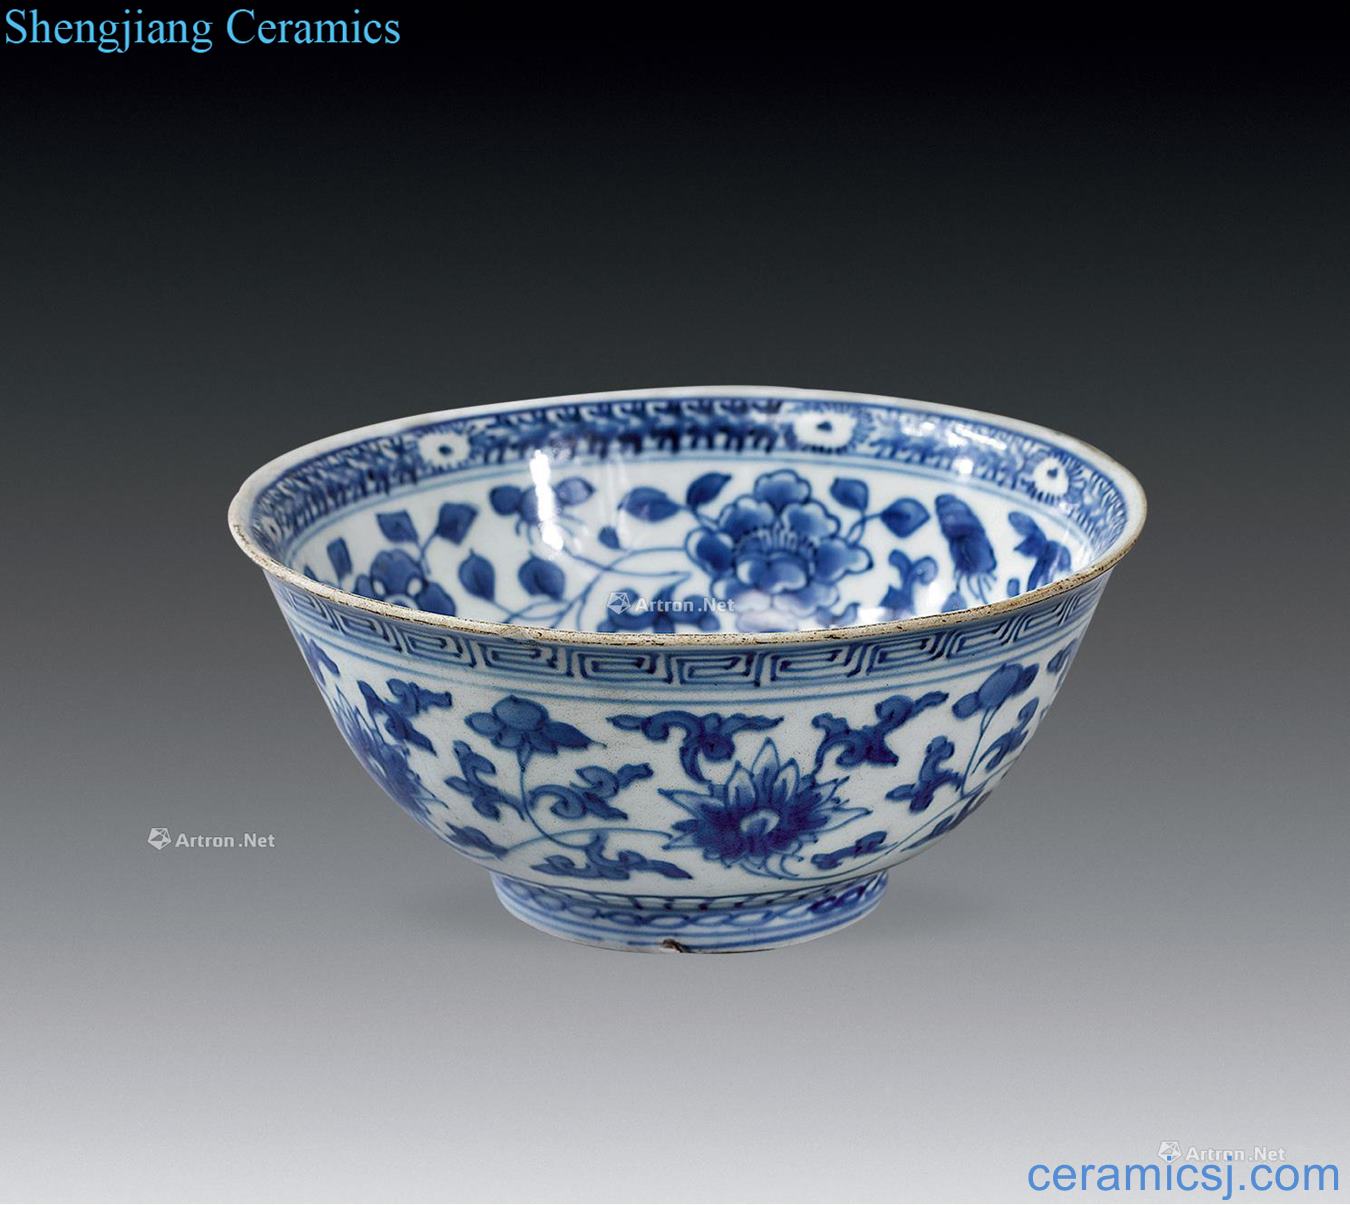 Early in the morning Blue and white peony green-splashed bowls